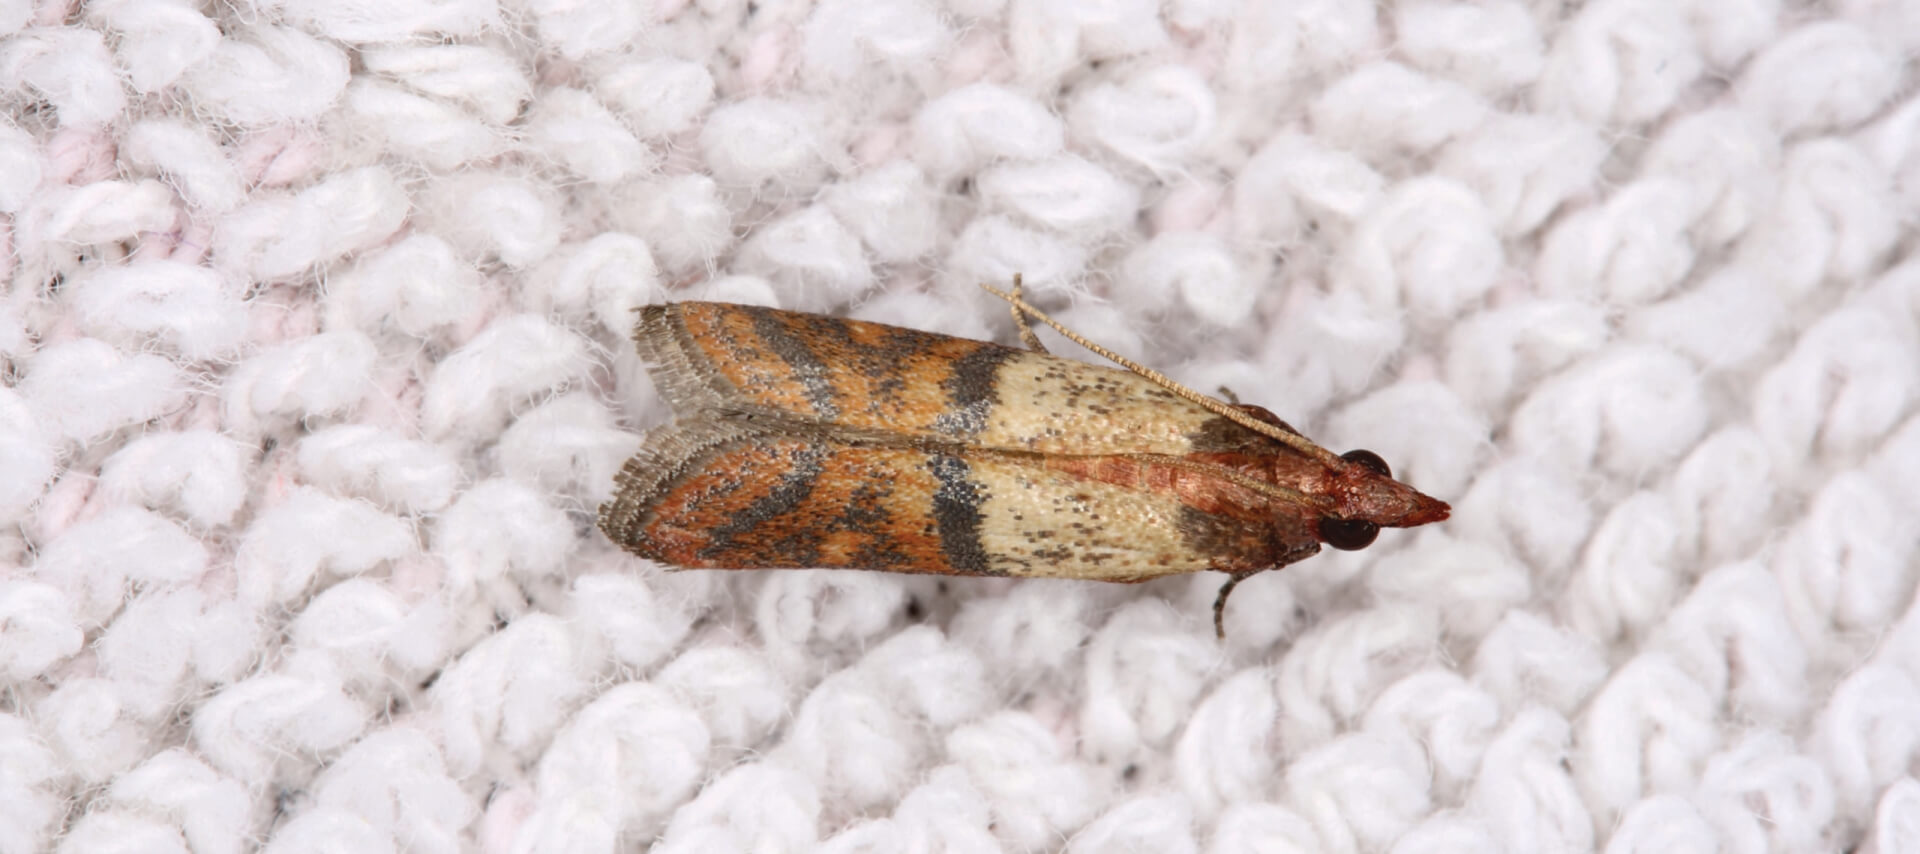 Clothes Moths and Carpet Beetles: Identifying and Controlling